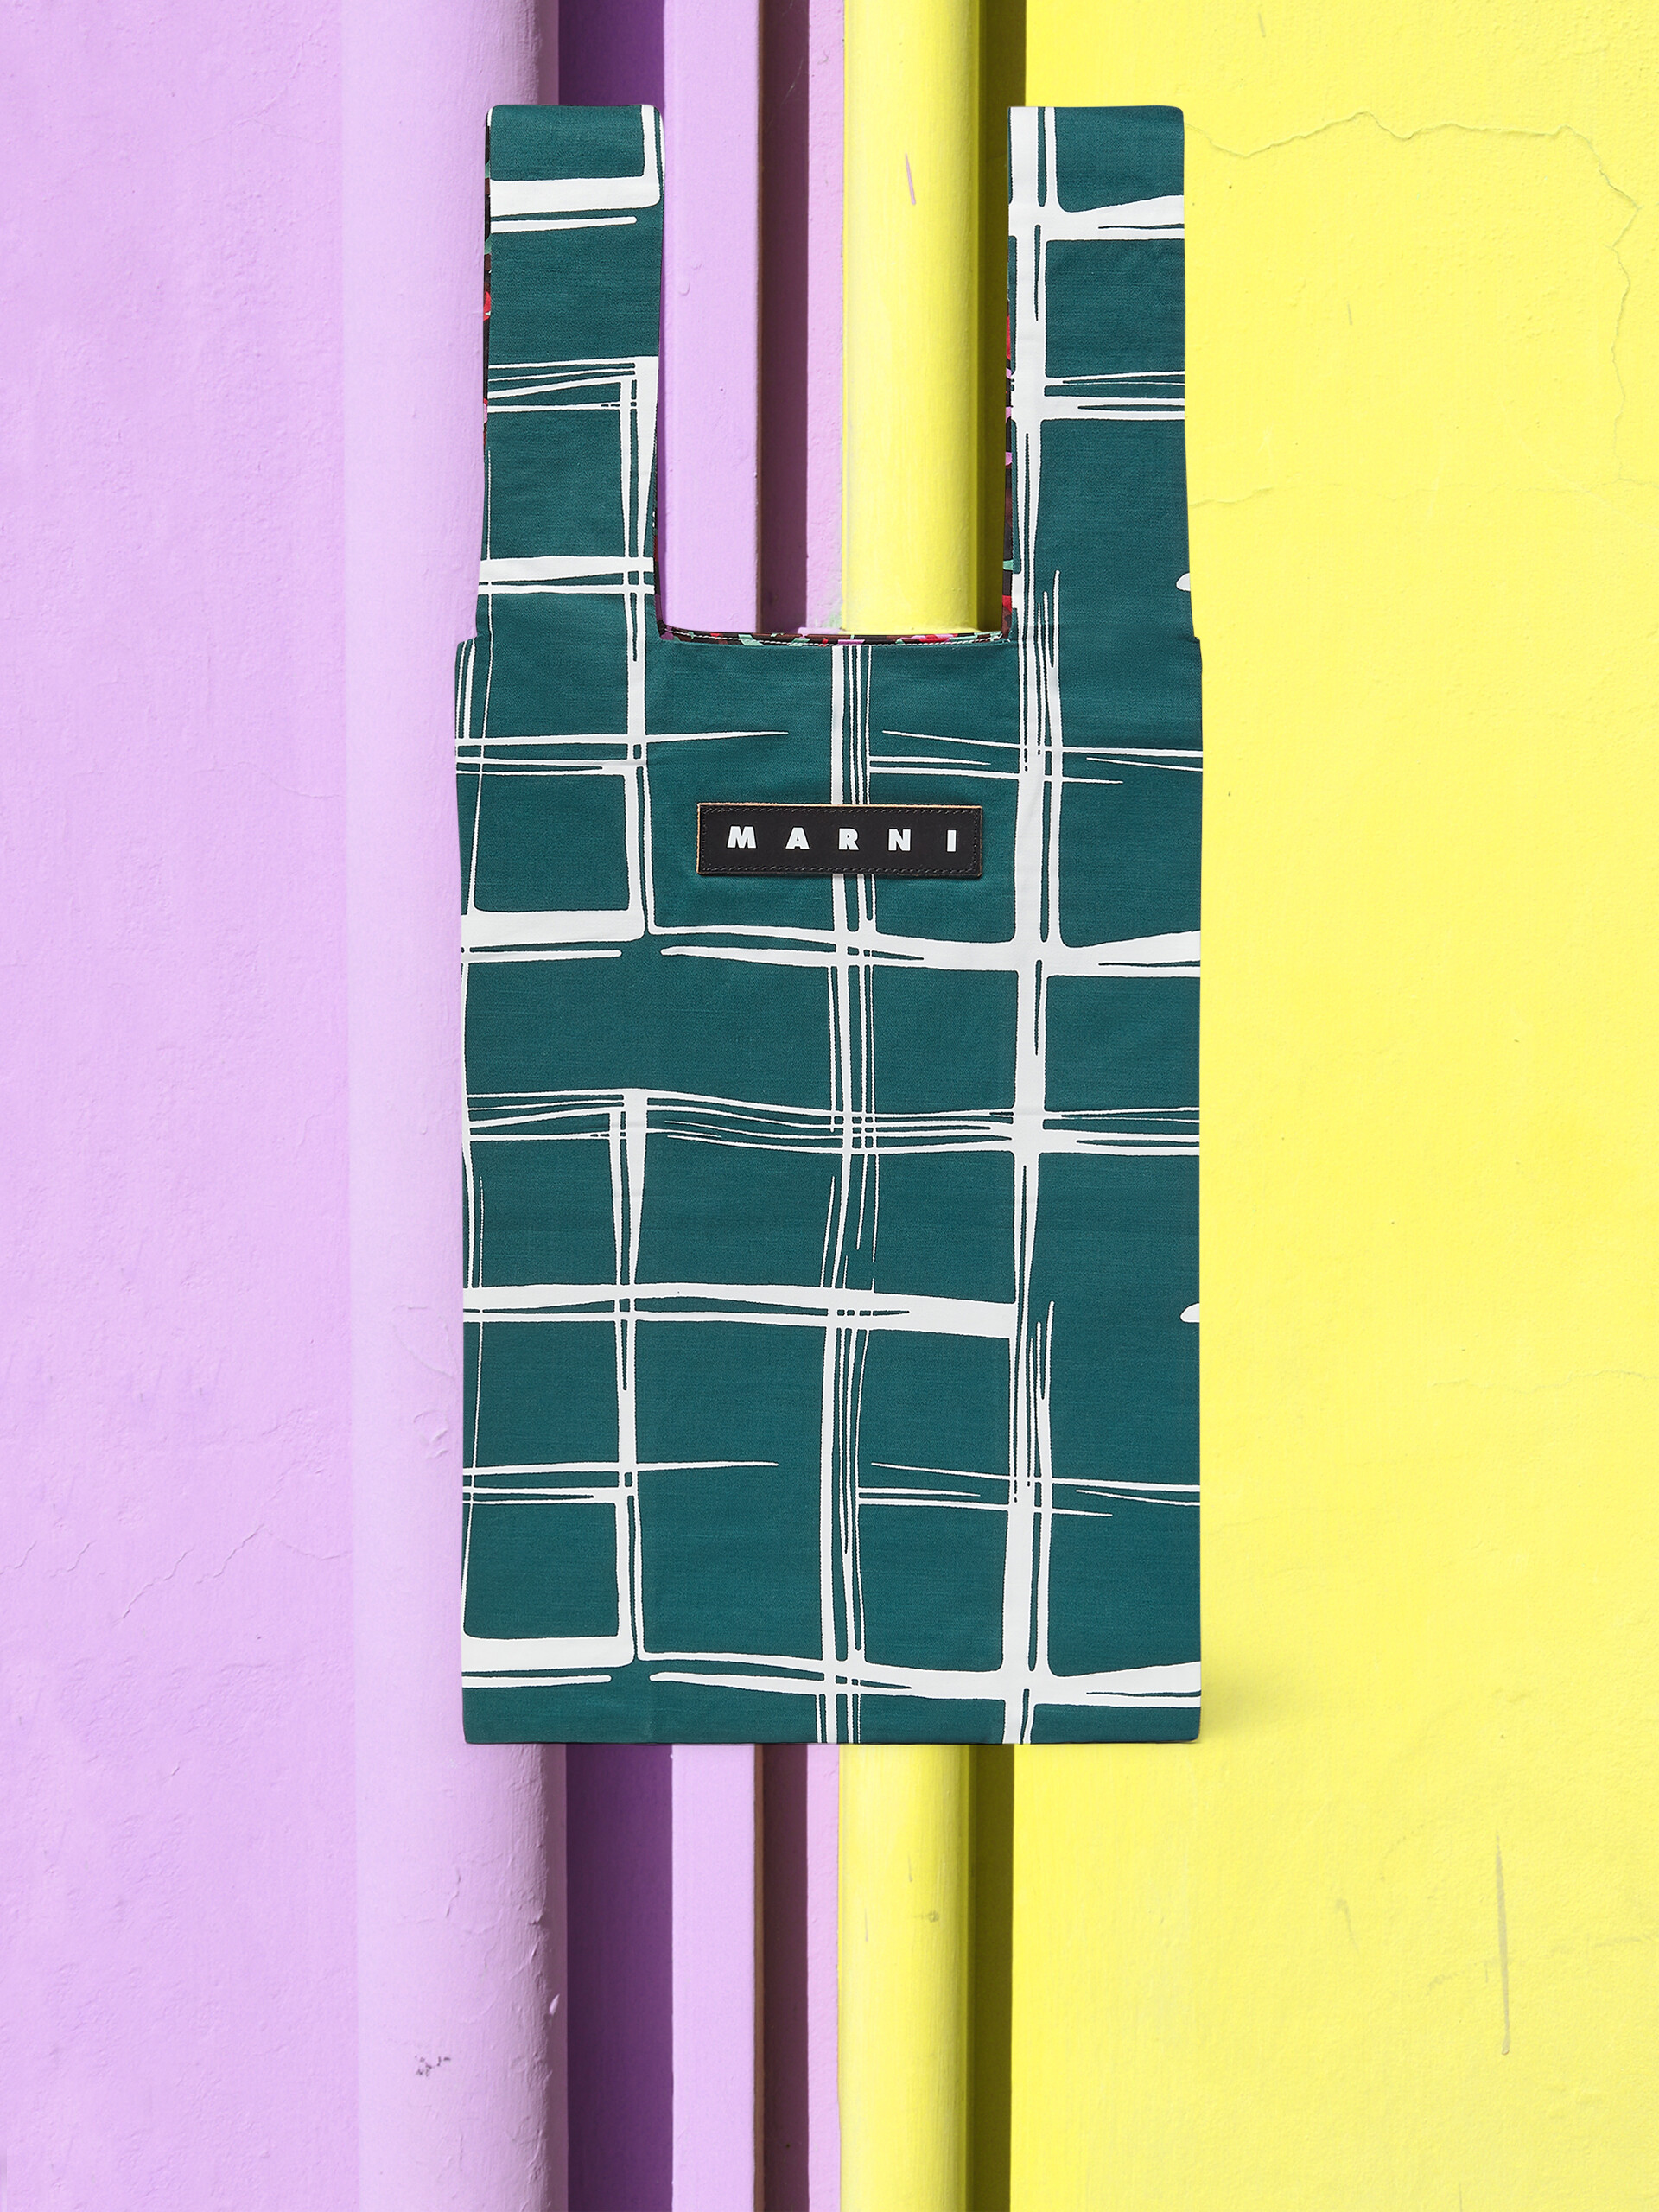 MARNI MARKET cotton shopping bag with check and floral print - Shopping Bags - Image 1